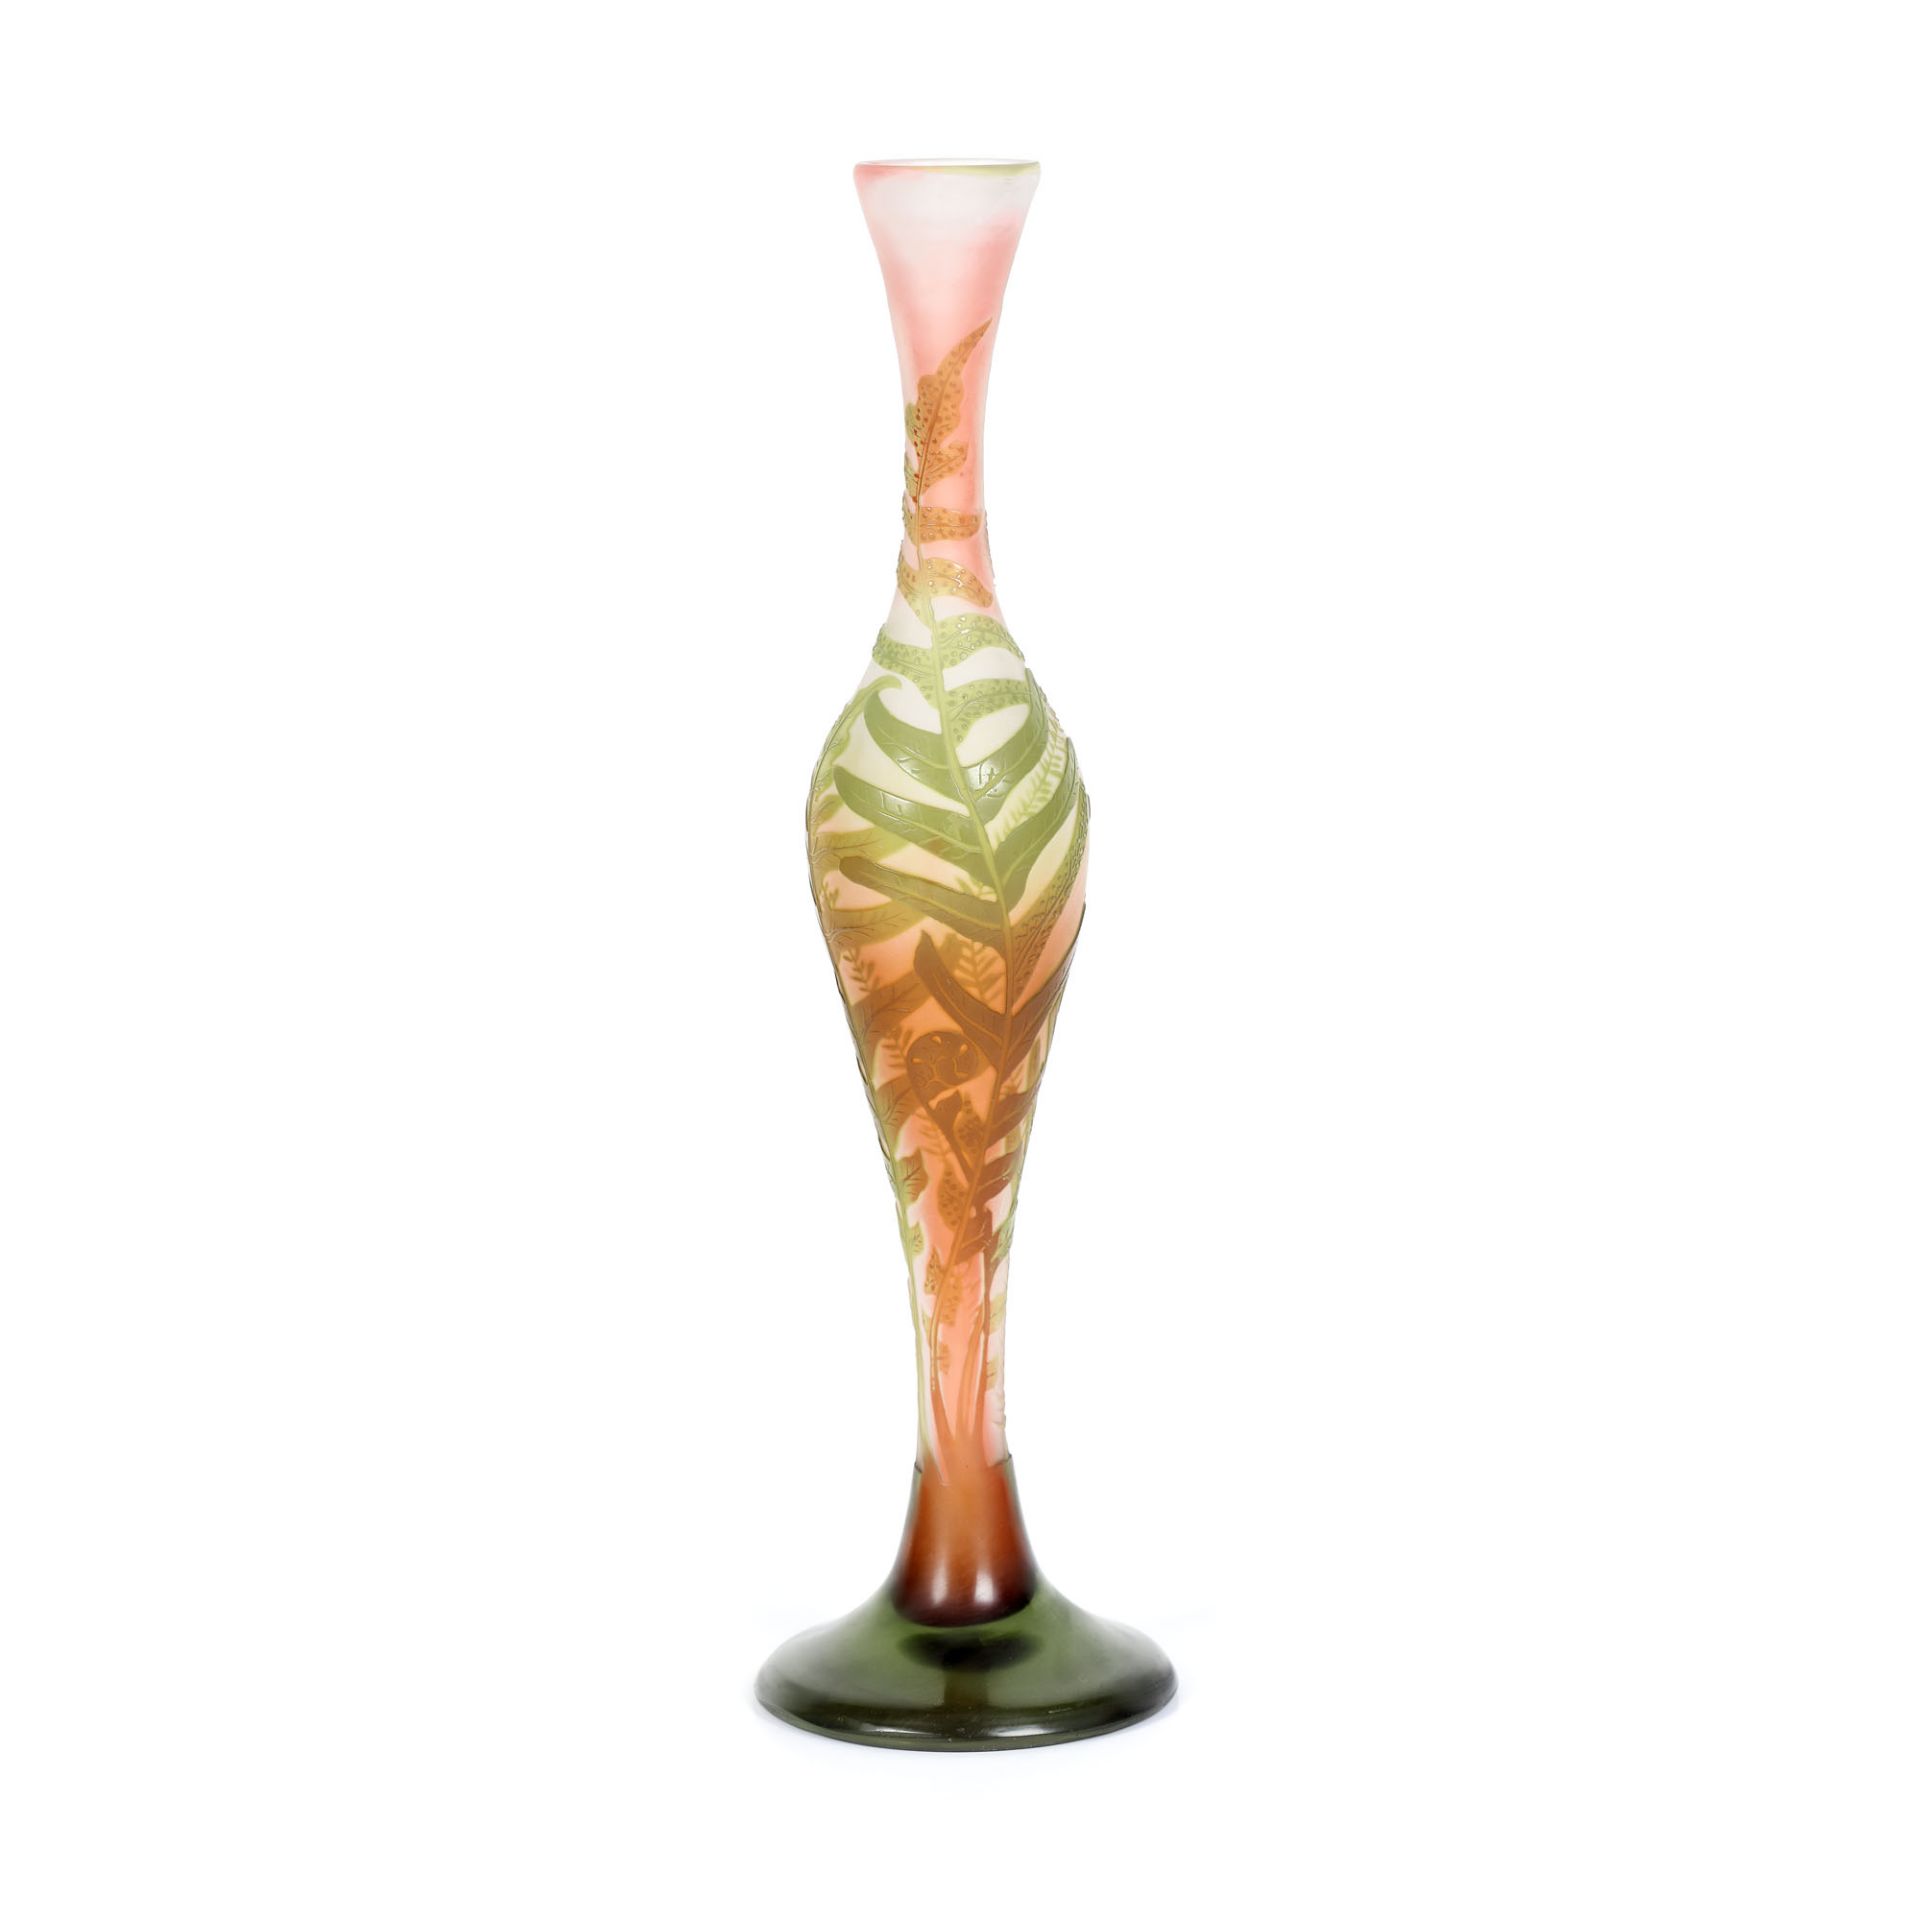 French workshop, "Fougères" - Gallé vase decorated with ferns, in orange and green tones, approx. 19